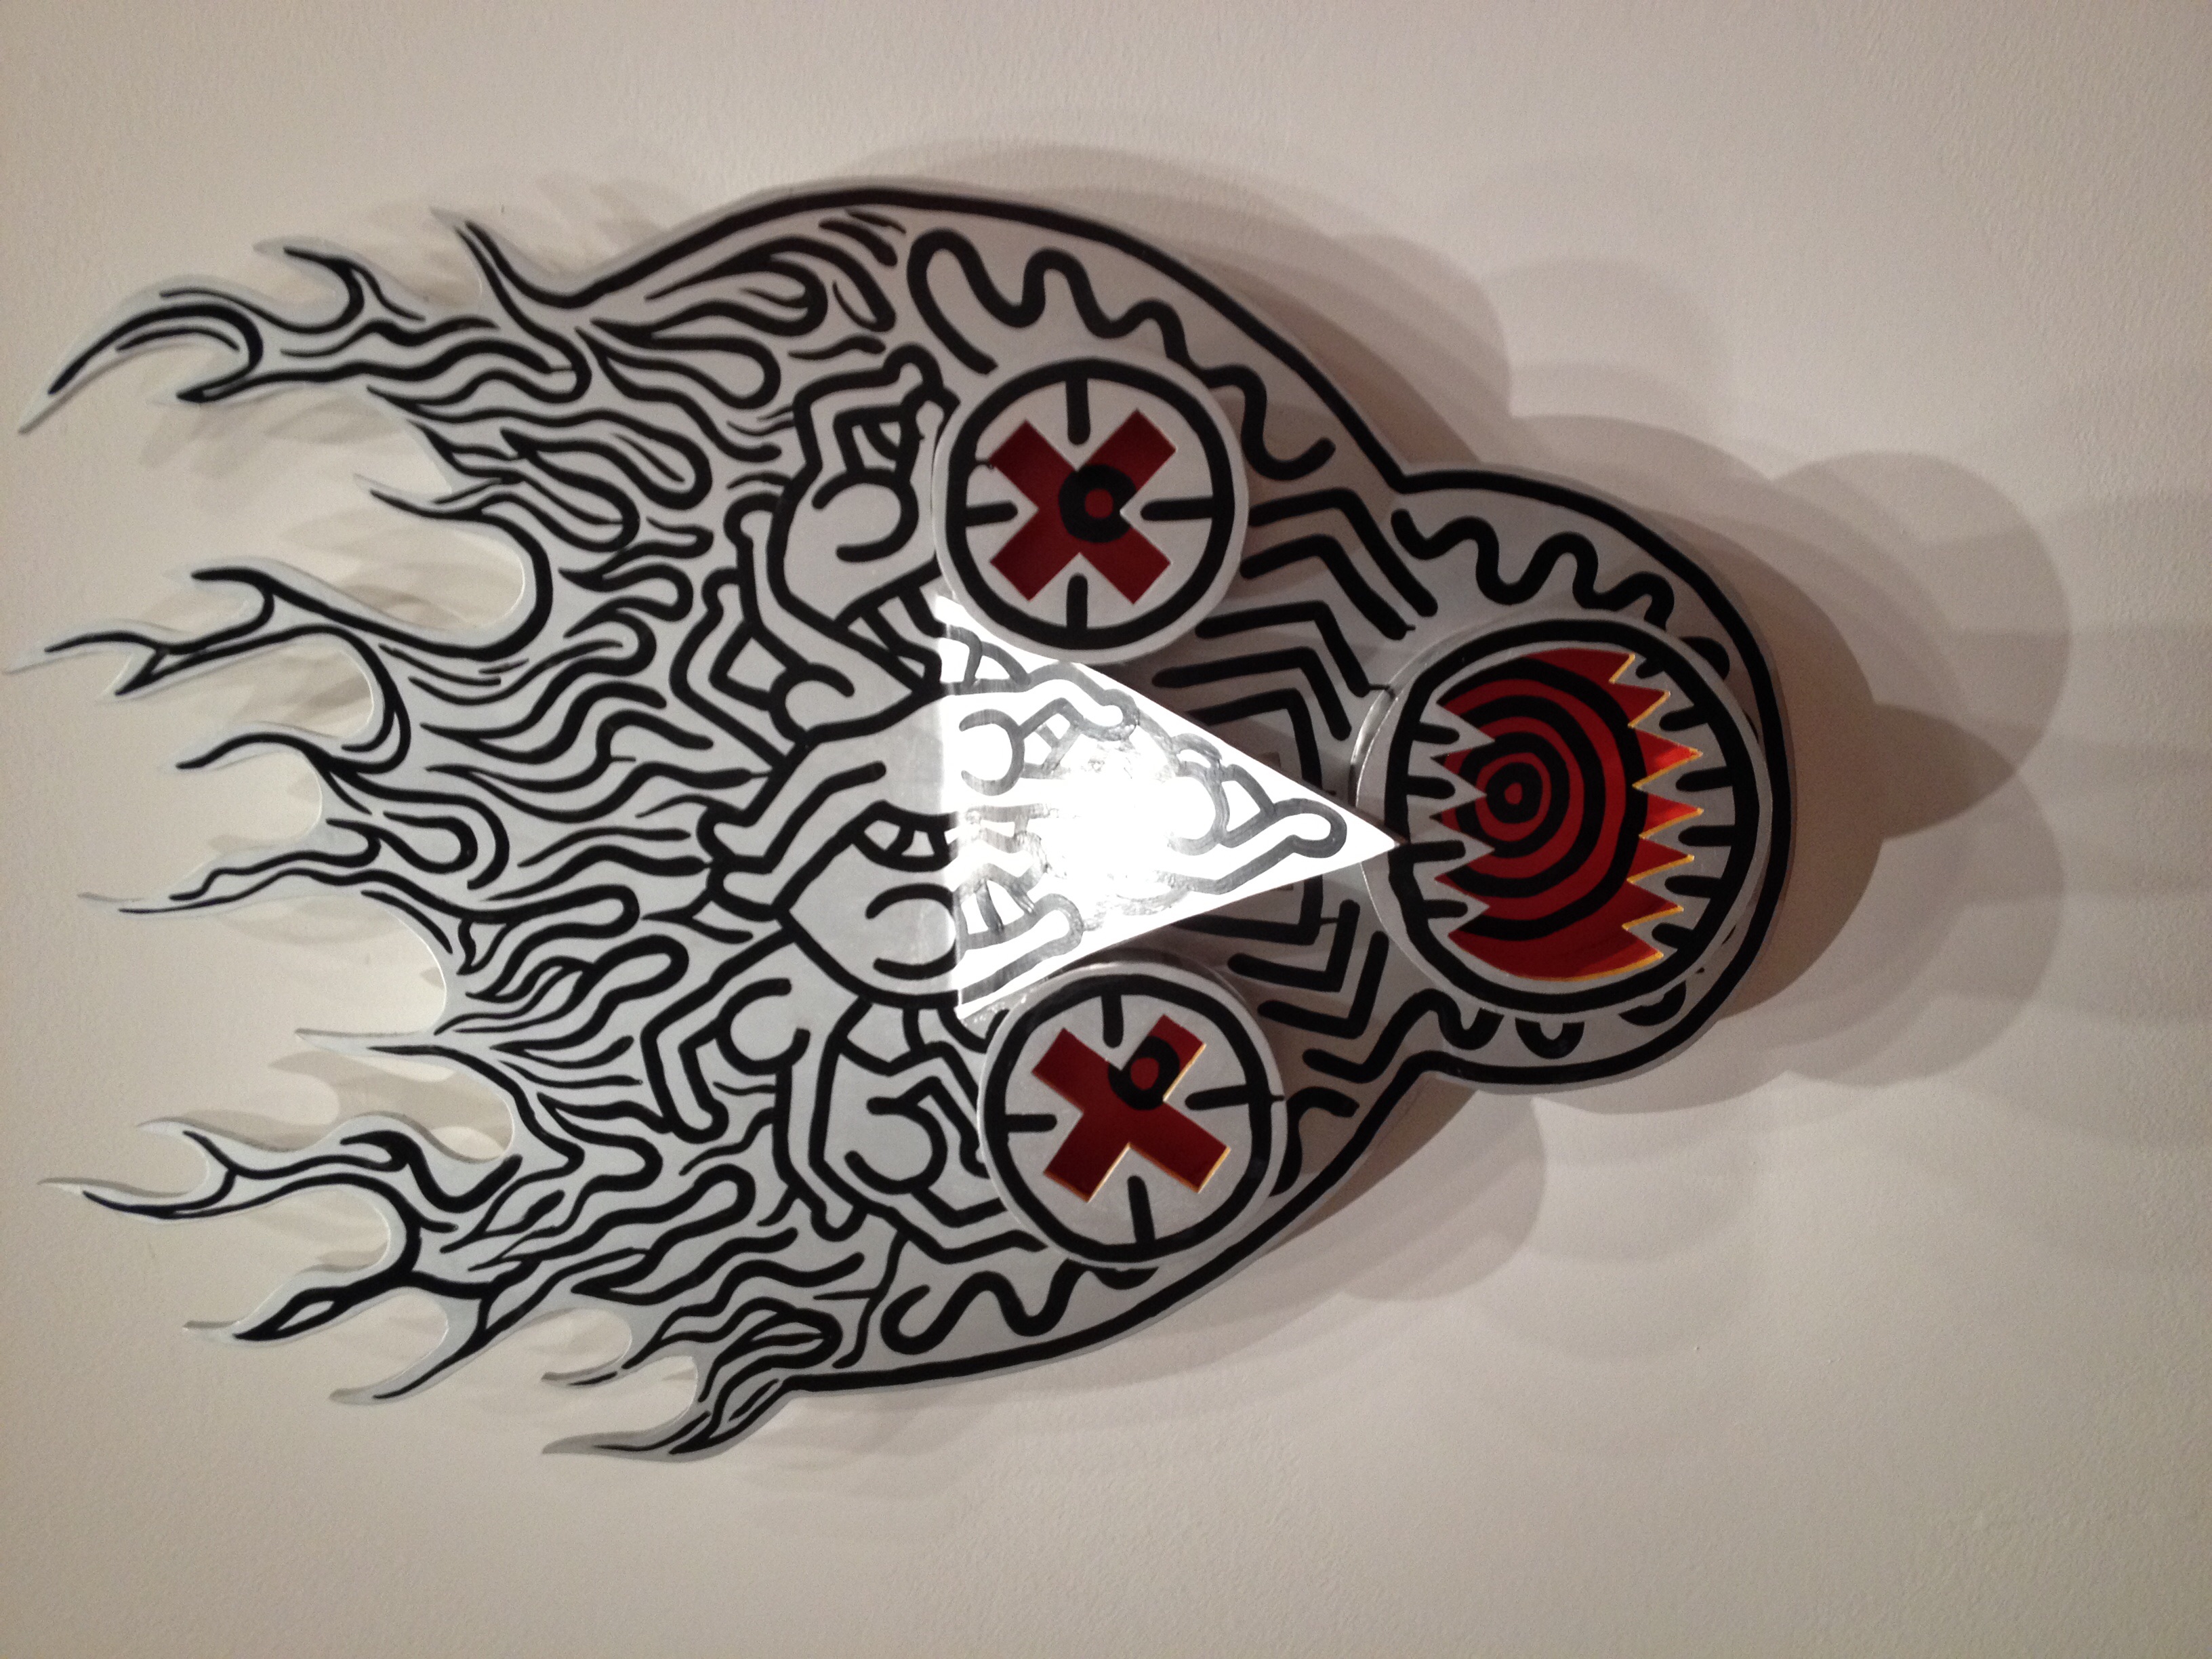 Untitled (Burning Skull), 1987. Keith Haring: The Politcal Line.  deYoung Museum, San Francisco. 2015.